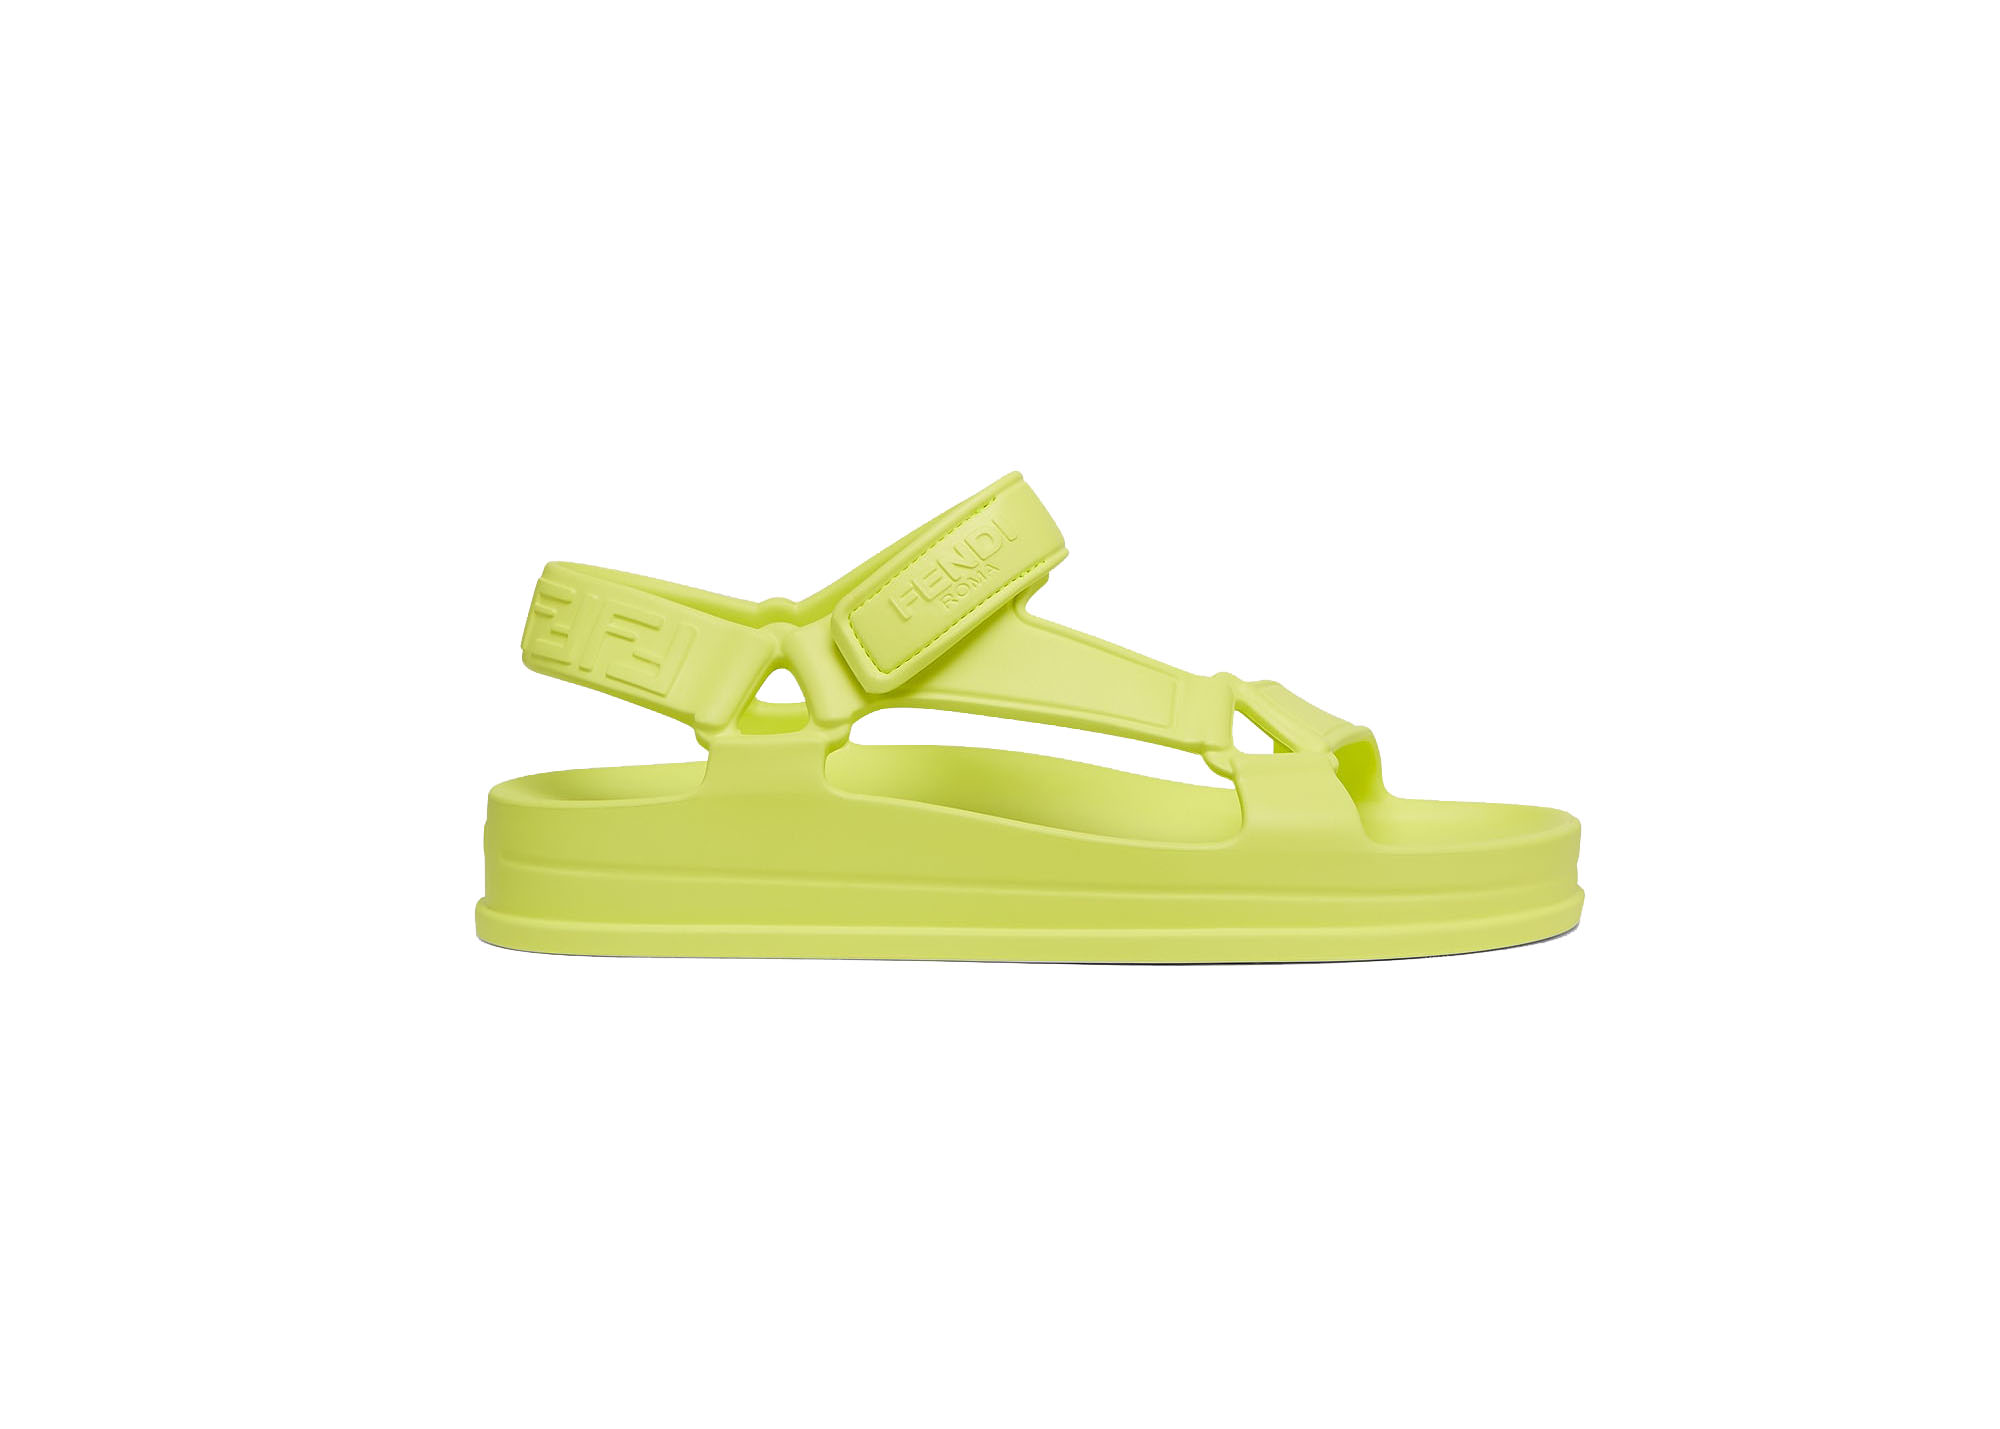 Love Moschino sandals in bright yellow | ASOS